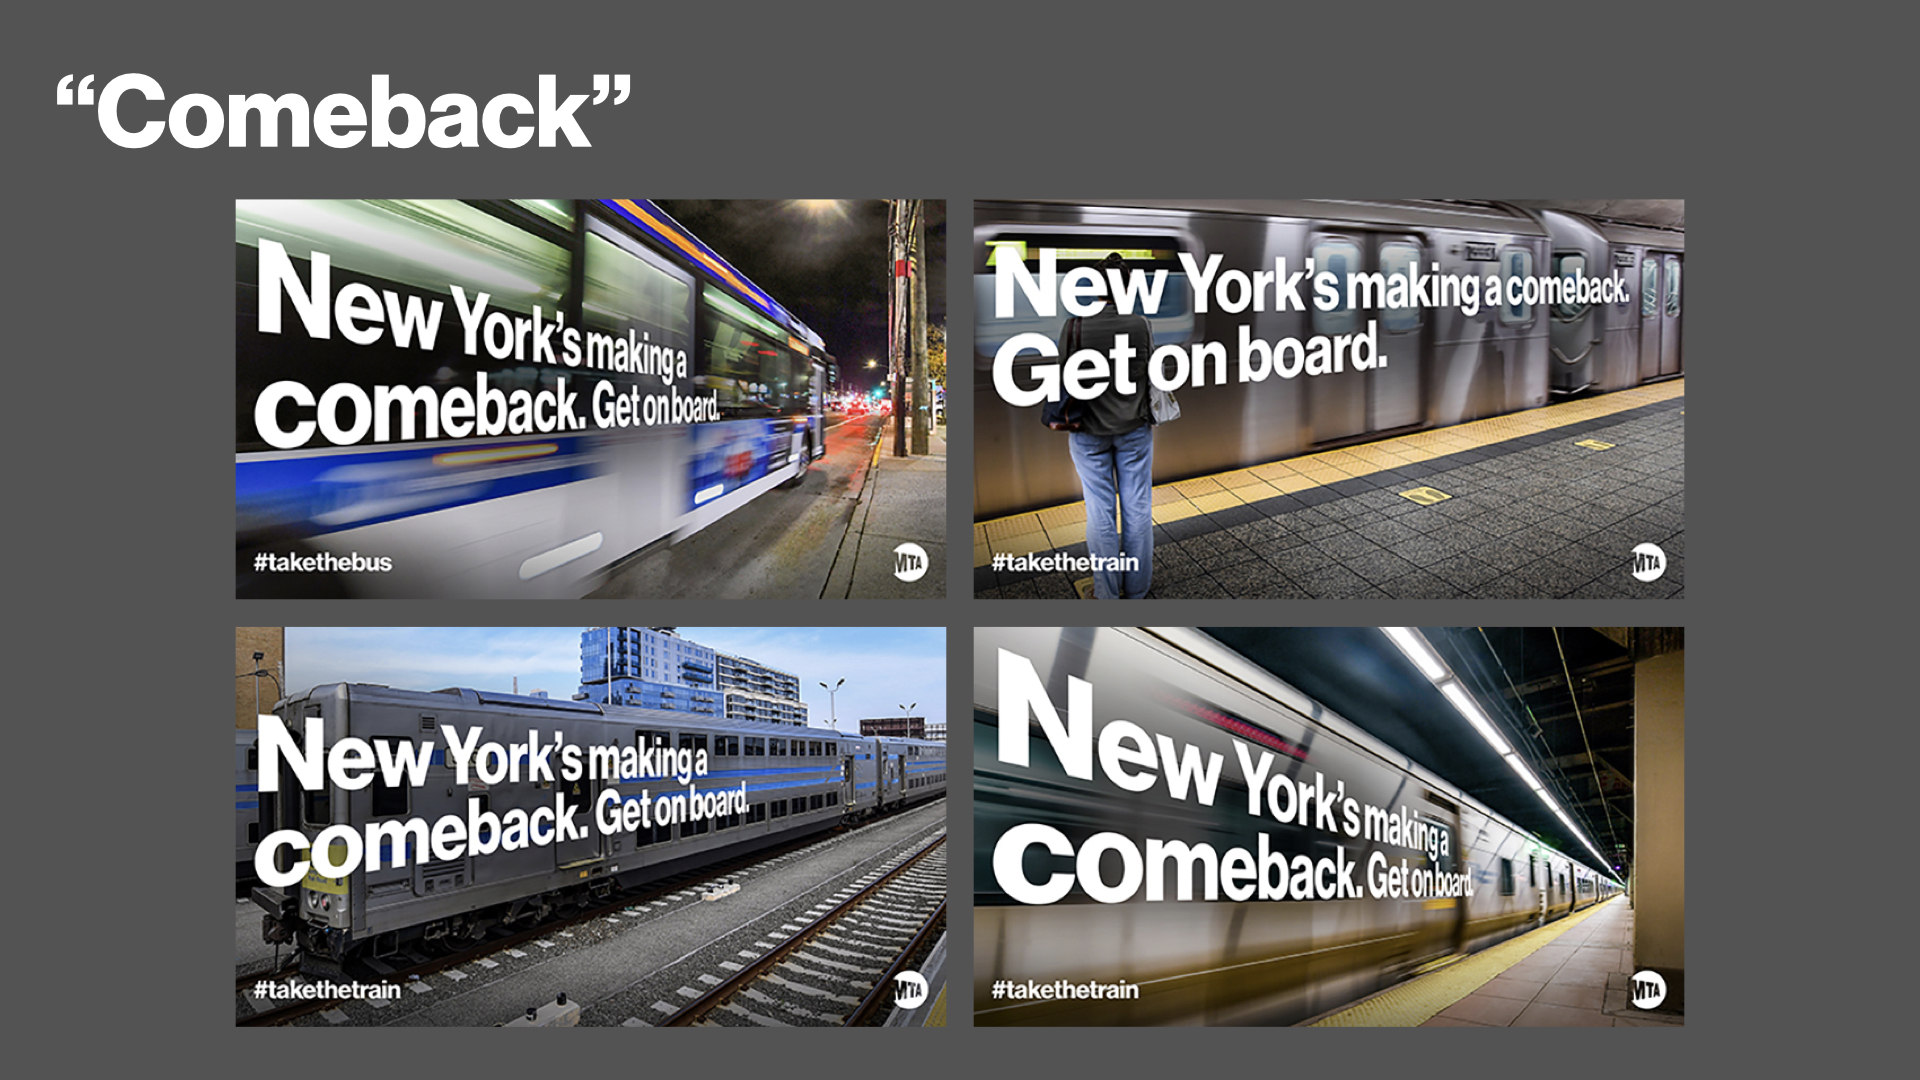 The Metropolitan Transportation Authority (MTA) today launched an unprecedented marketing and communications campaign aimed at increasing ridership as the New York Metropolitan region recovers from the pandemic.